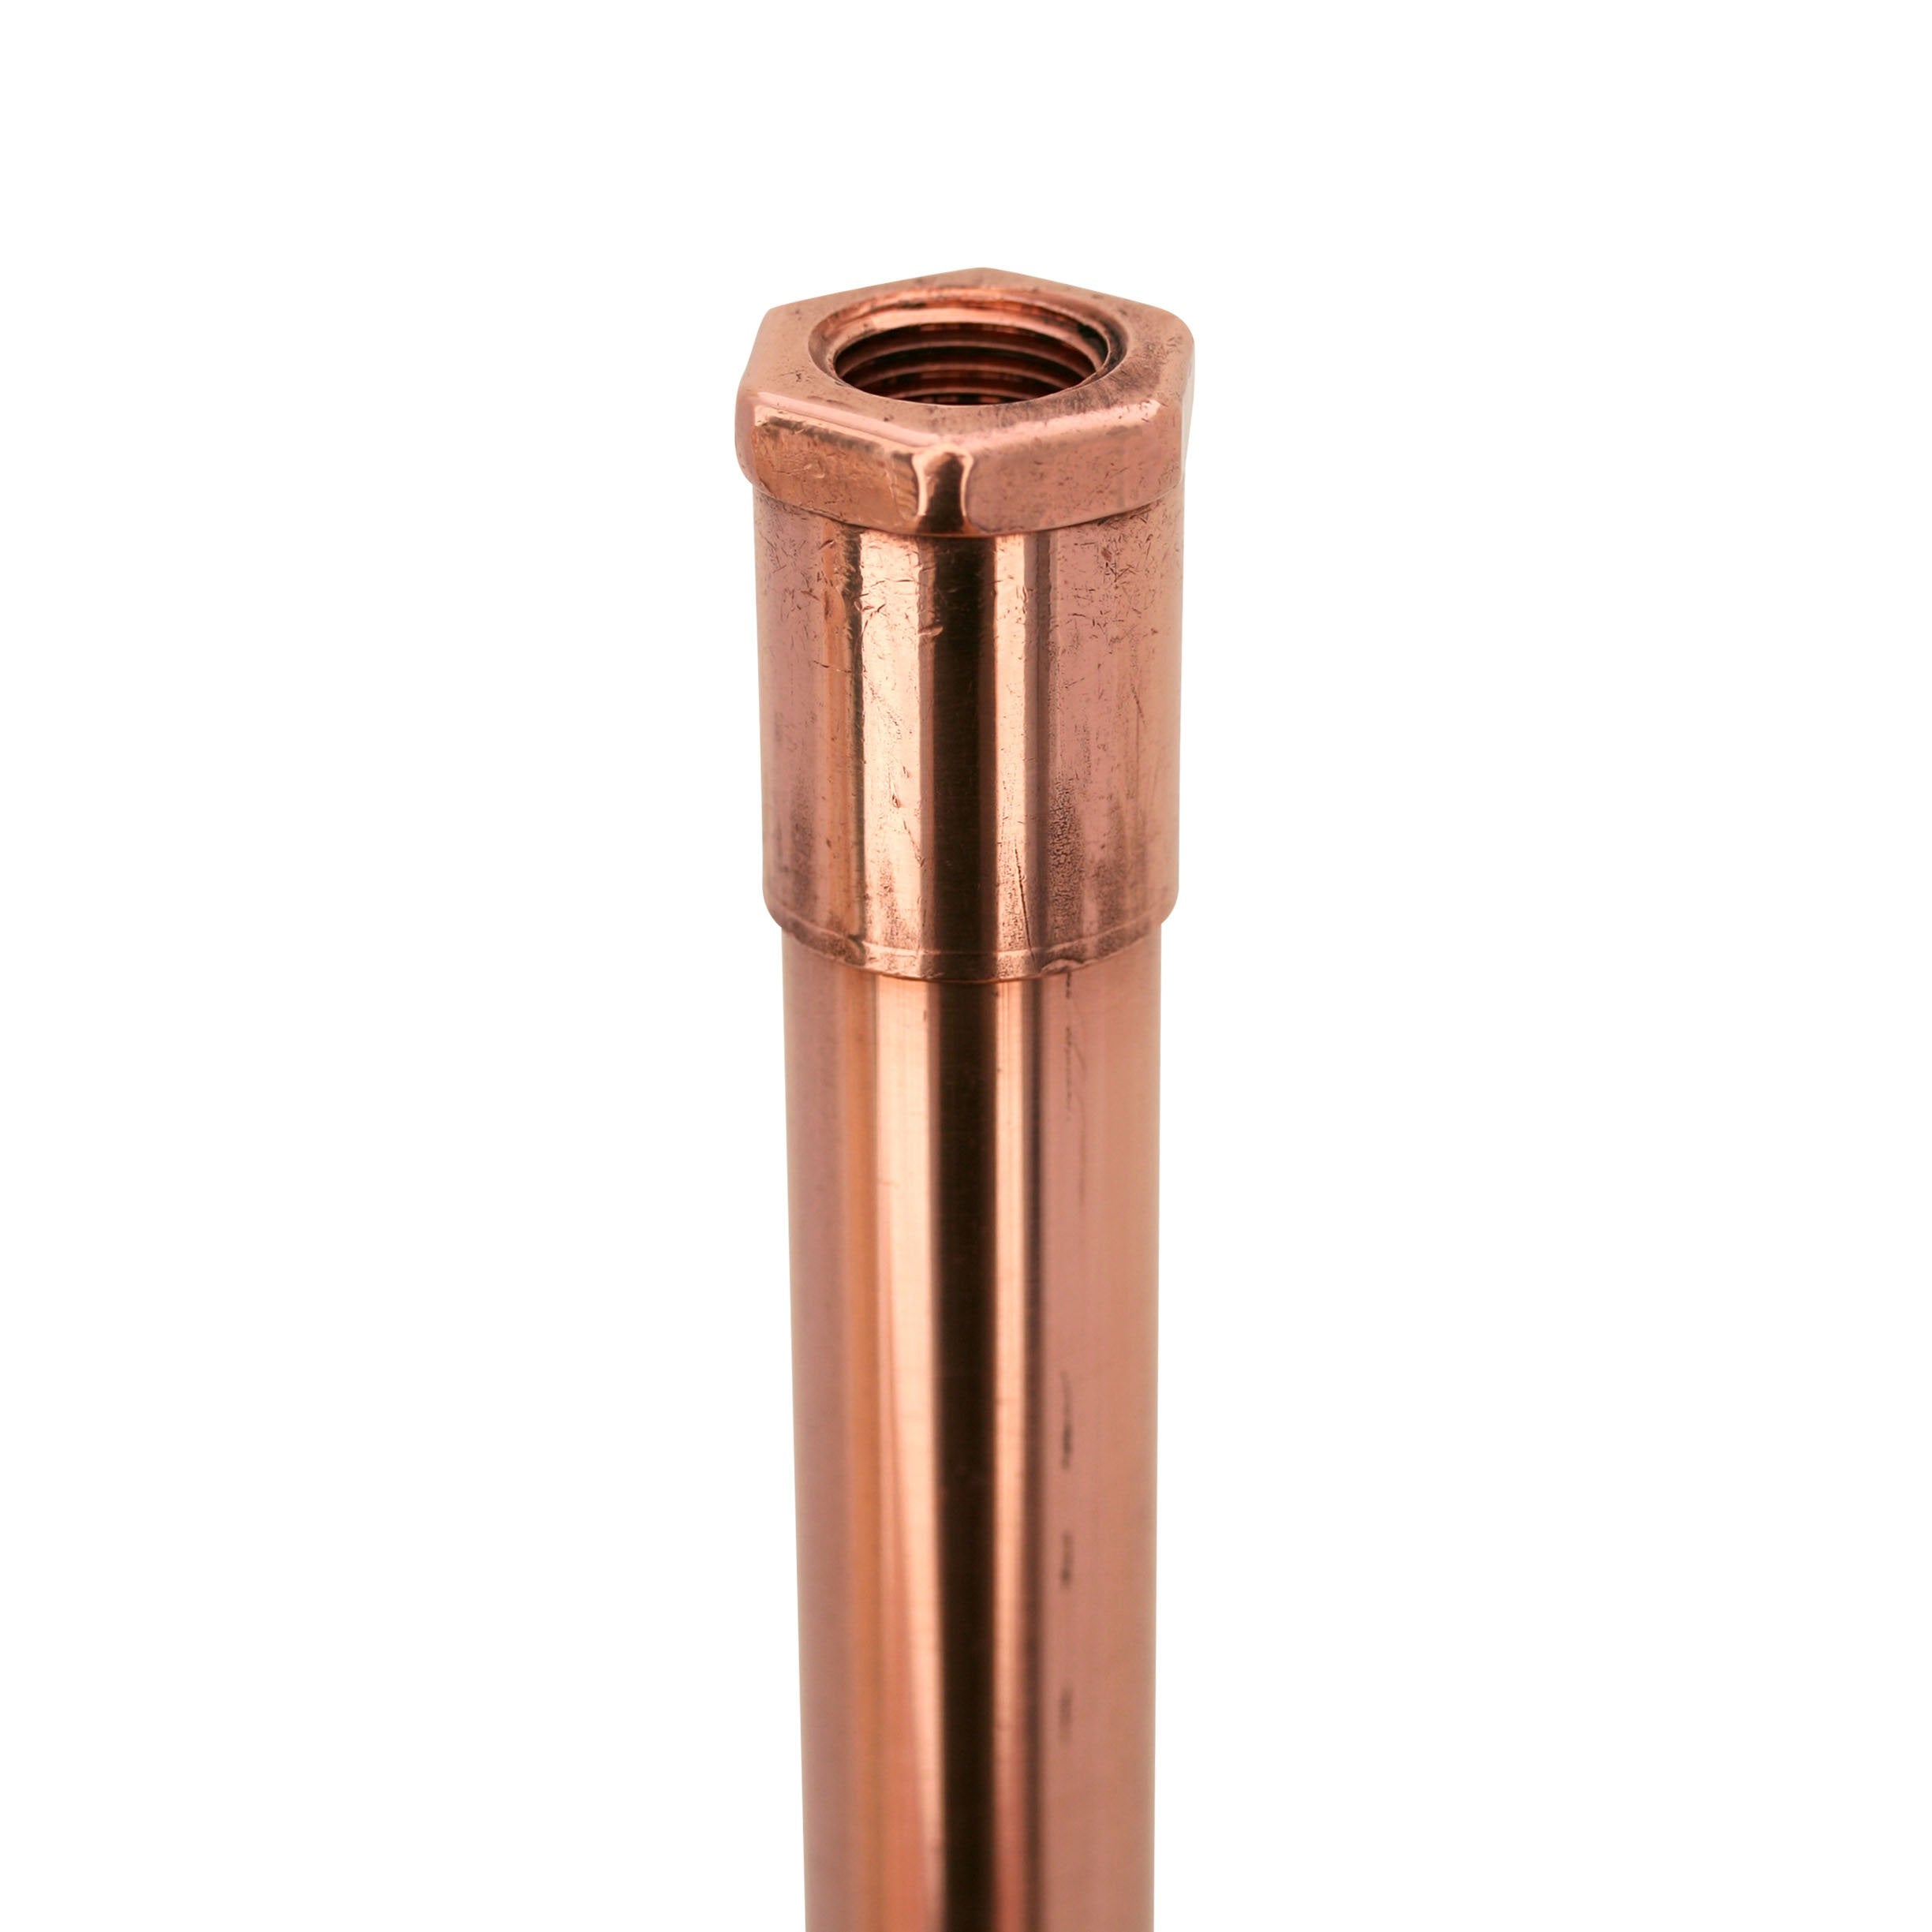 CopperMoon Custom Copper Stem ONLY for CM.CG path light